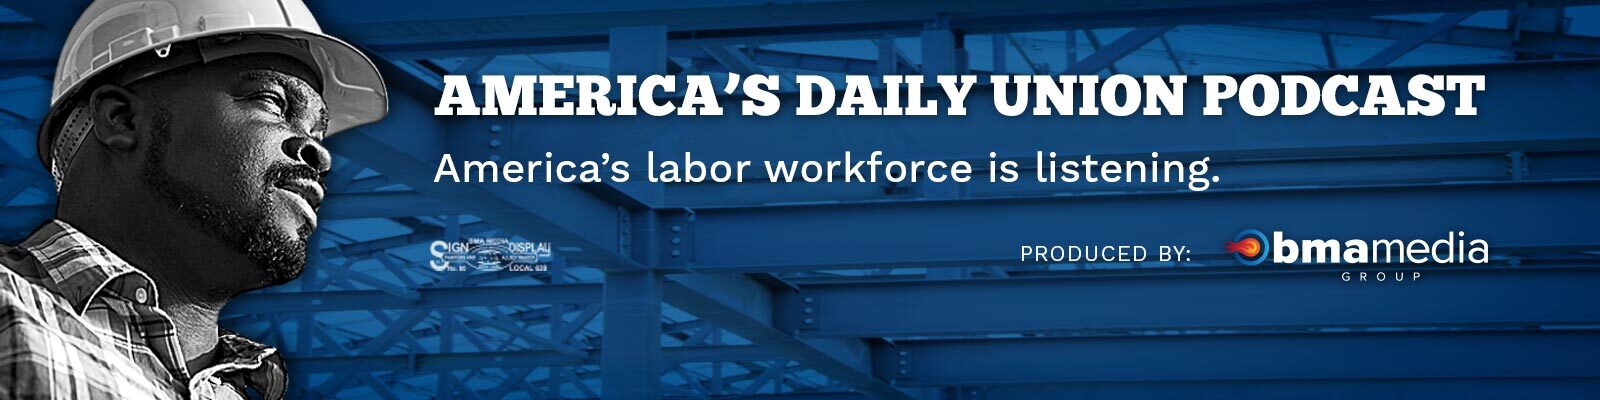 America's Work Force Union Podcast